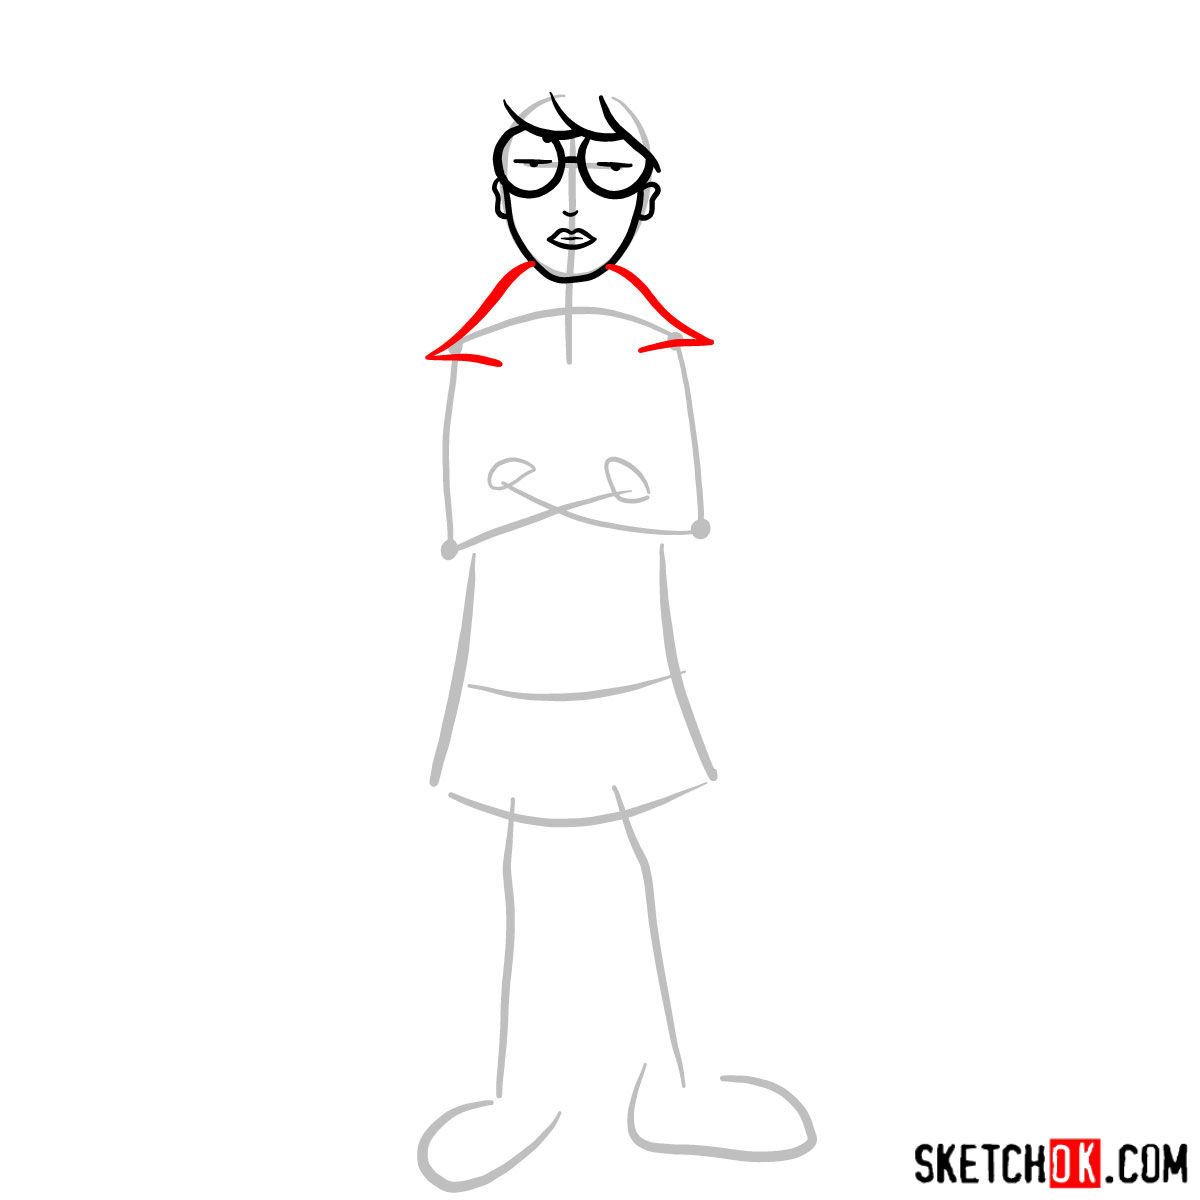 How to draw Daria - step 04